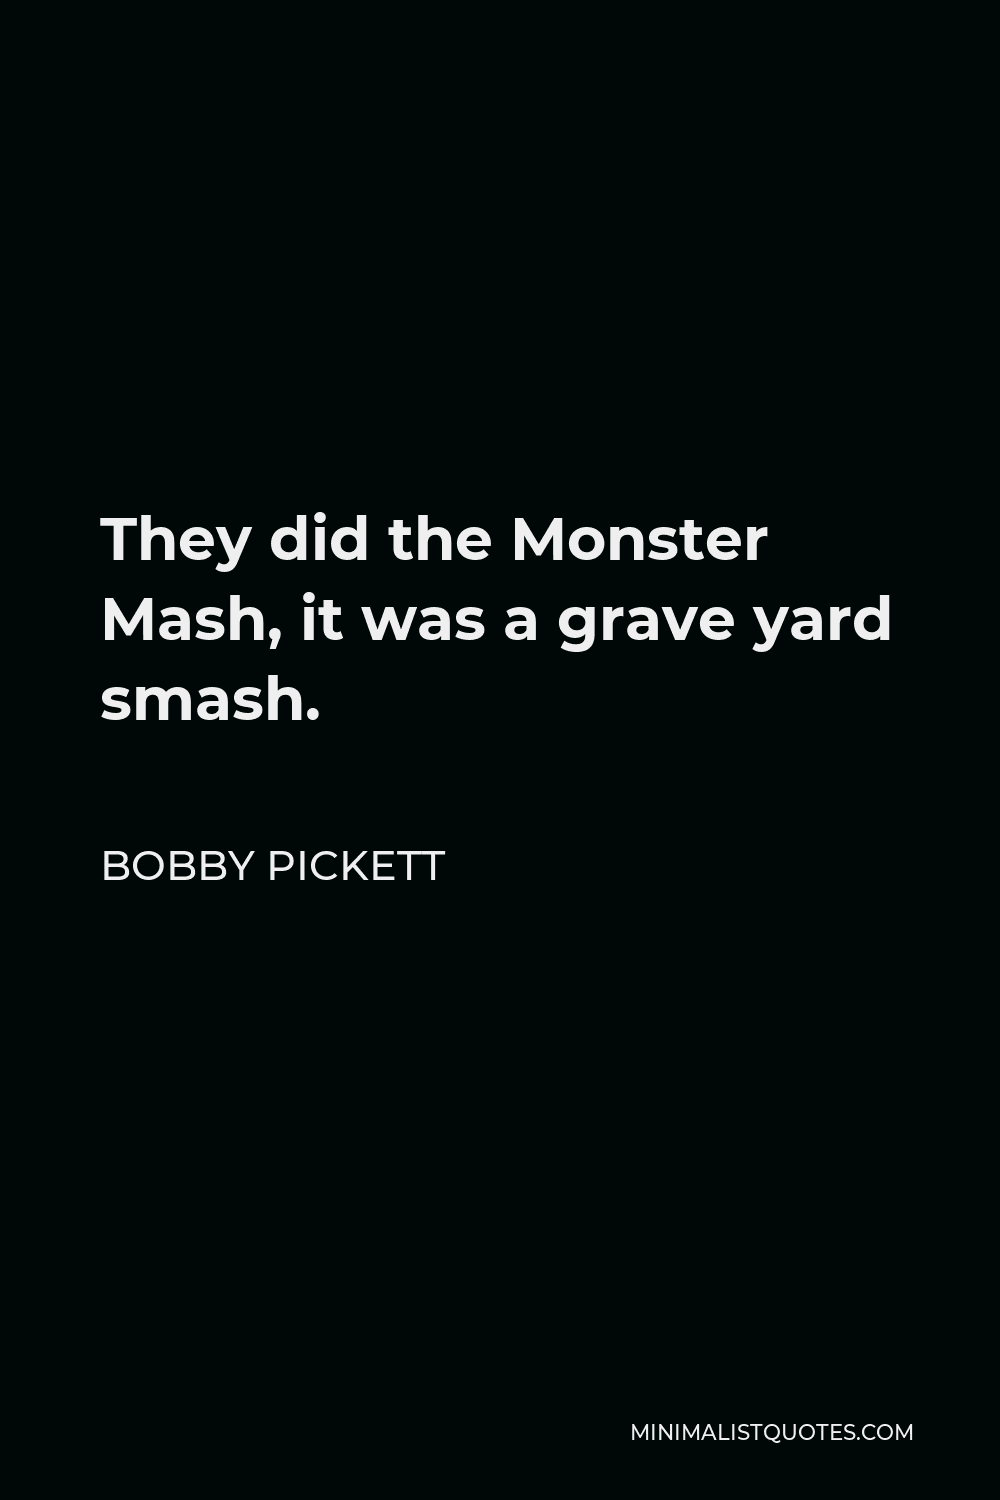 Bobby Pickett Quote - They did the Monster Mash, it was a grave yard smash.